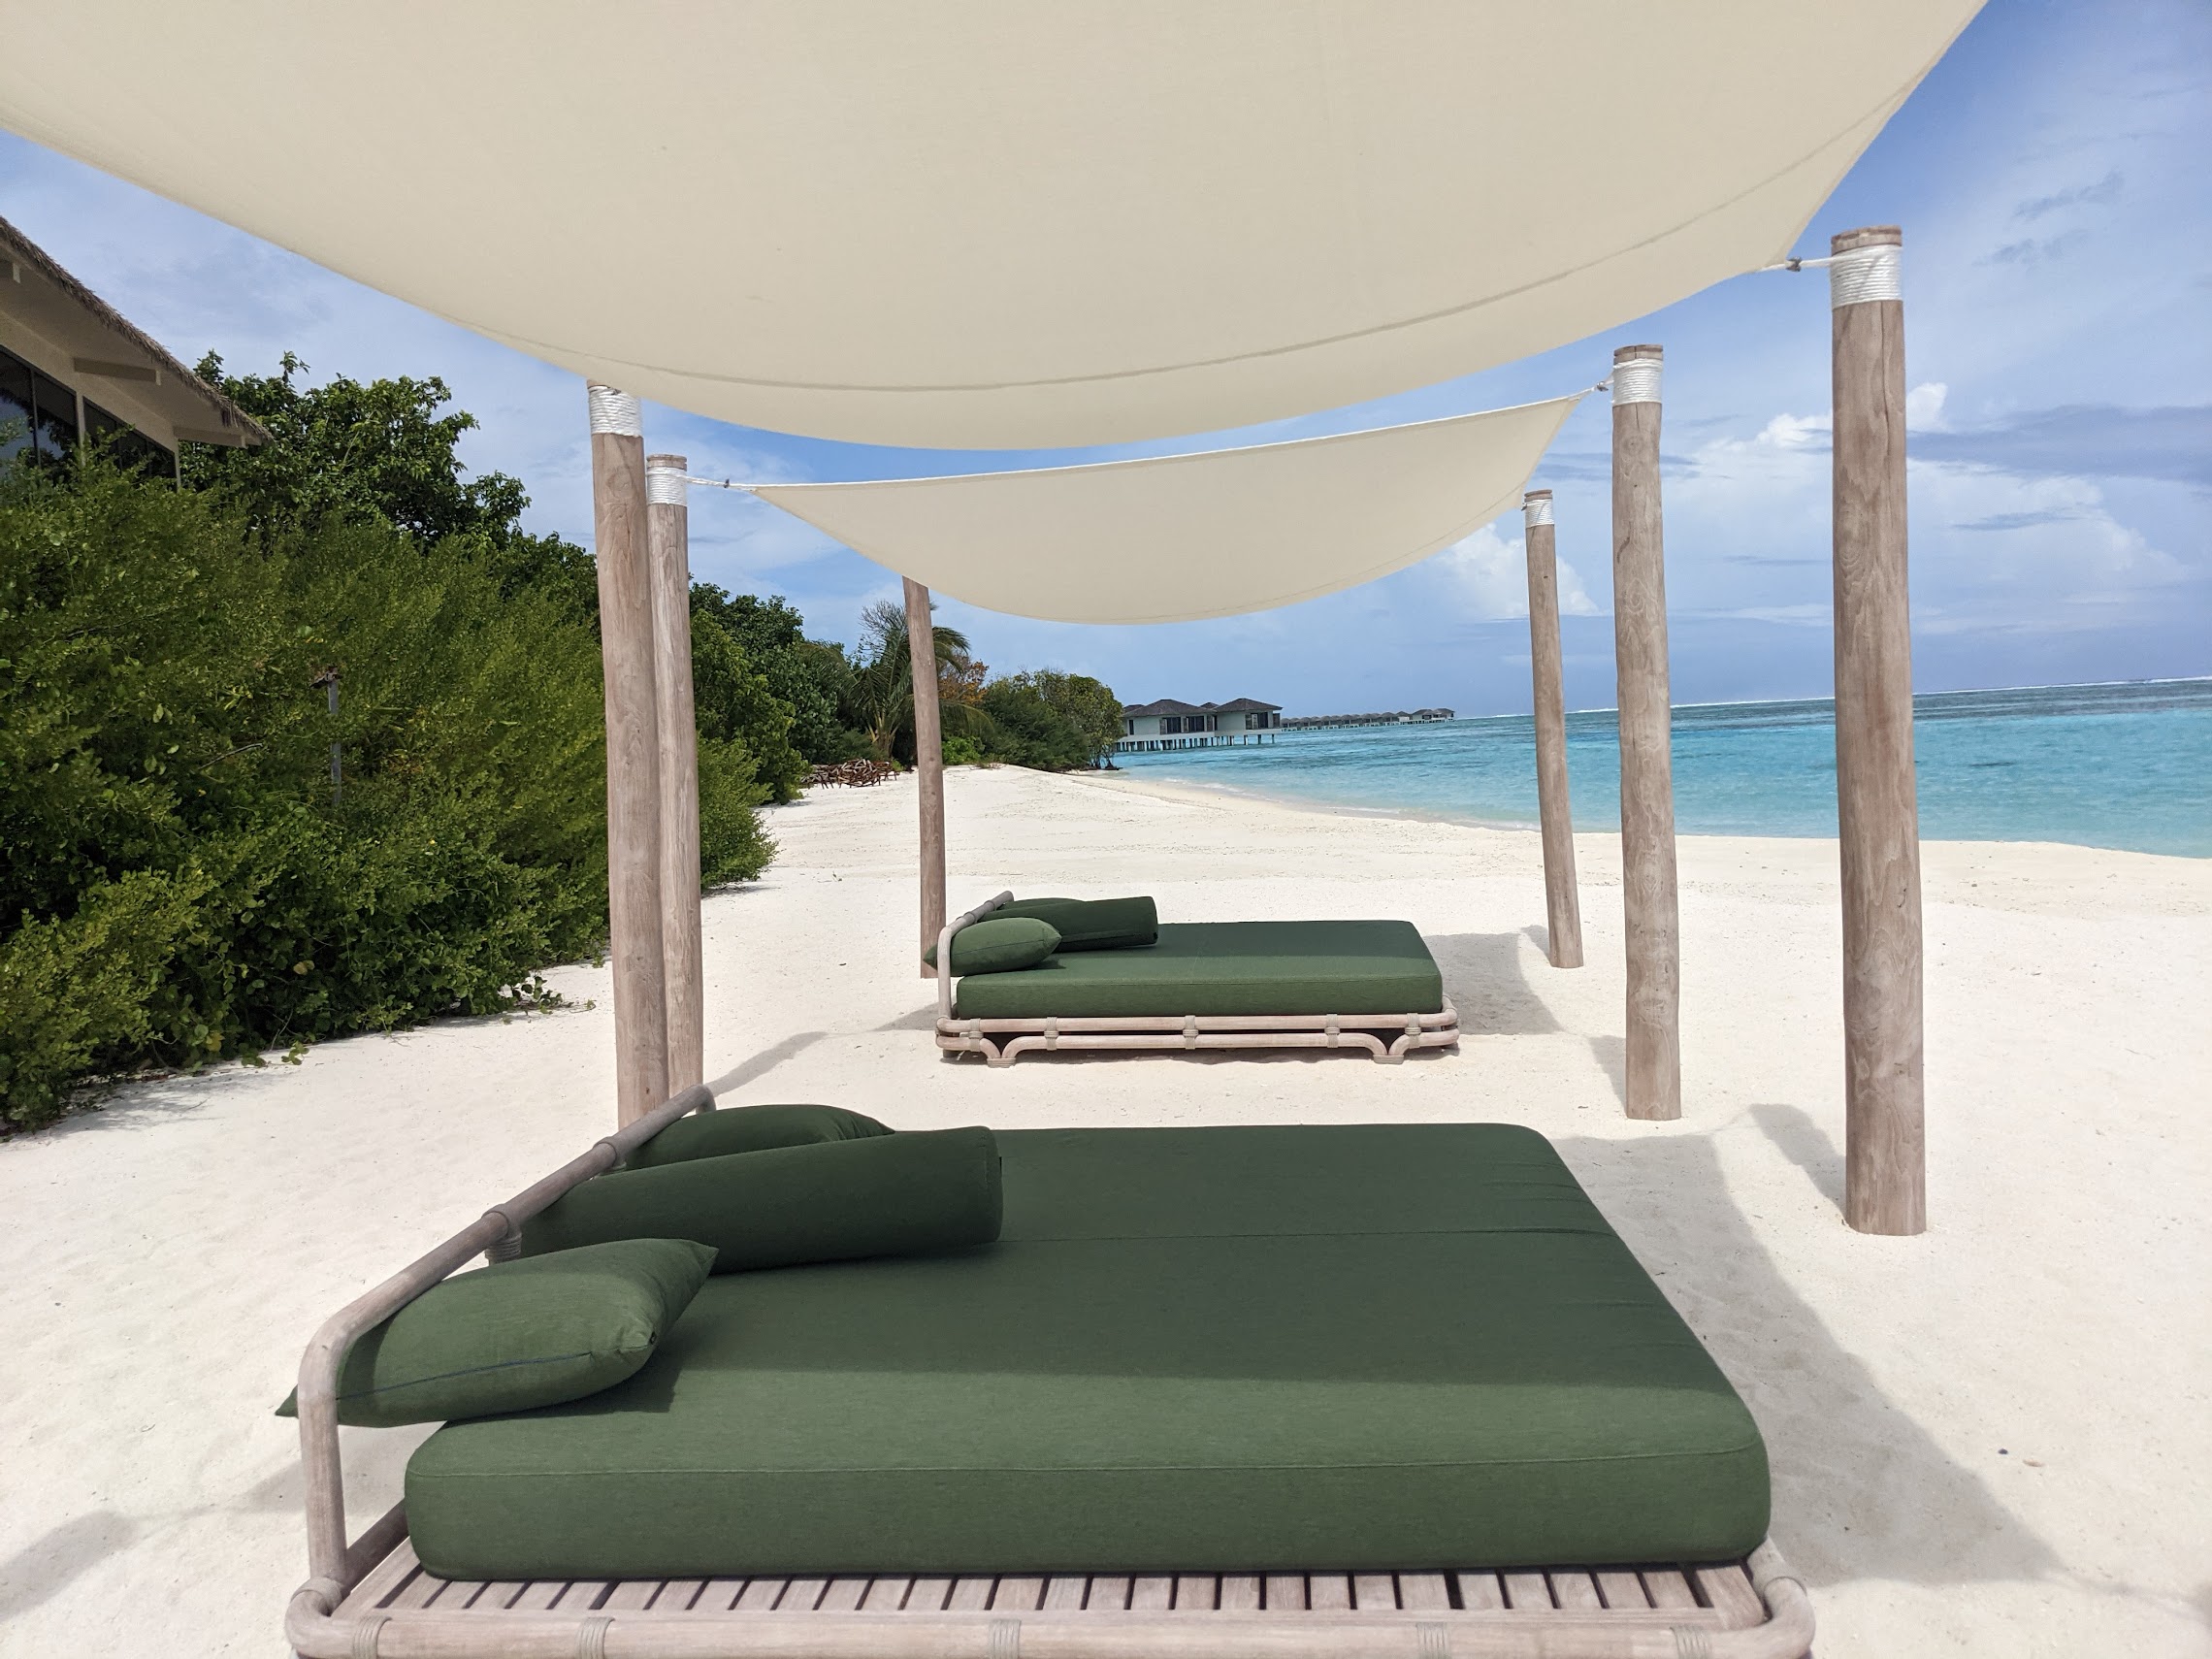 a group of beds on a beach